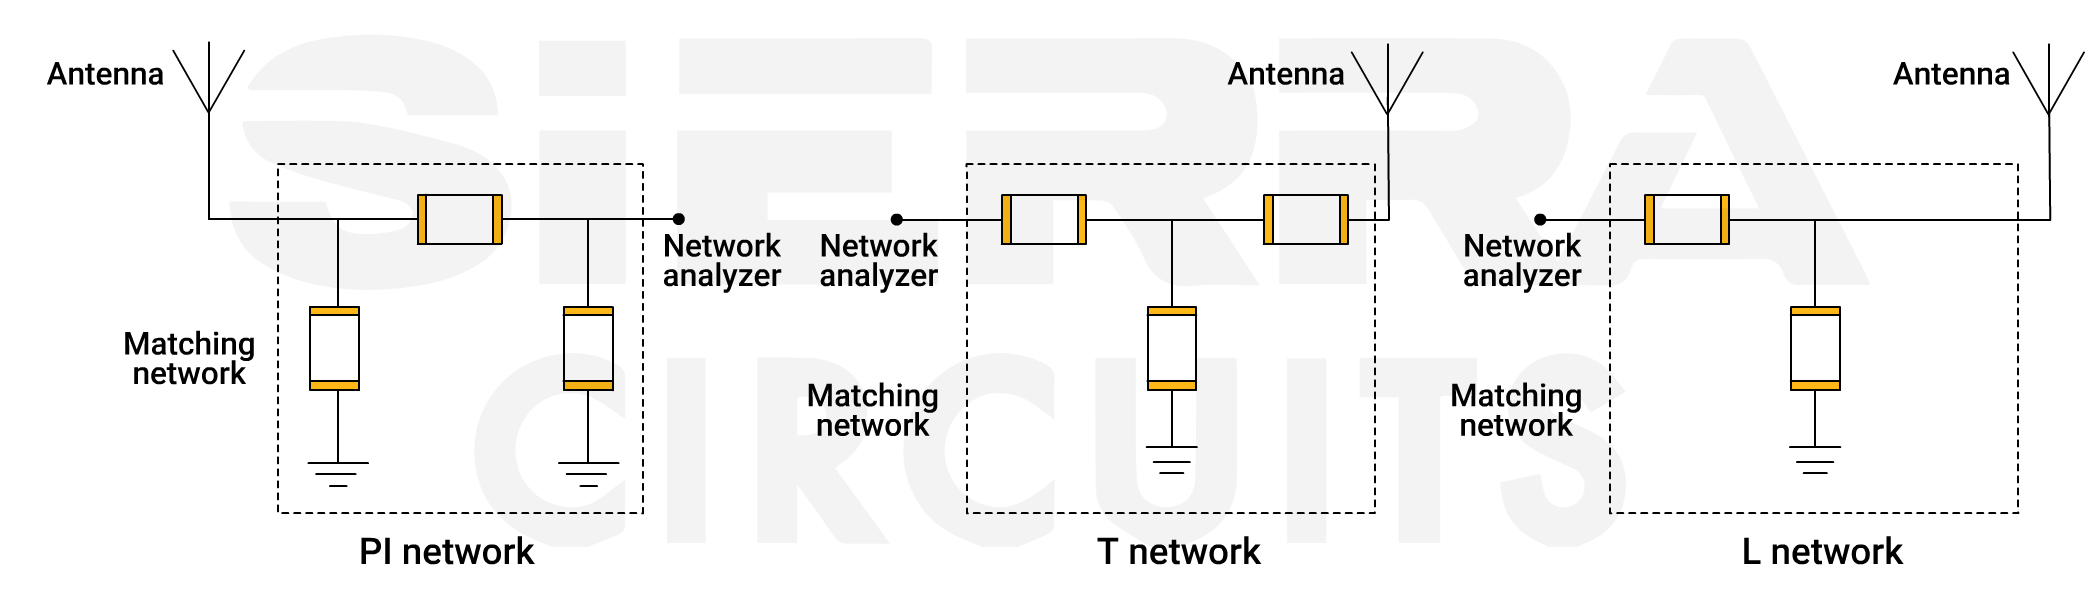 pi-t-and-l-network-topologies.jpg